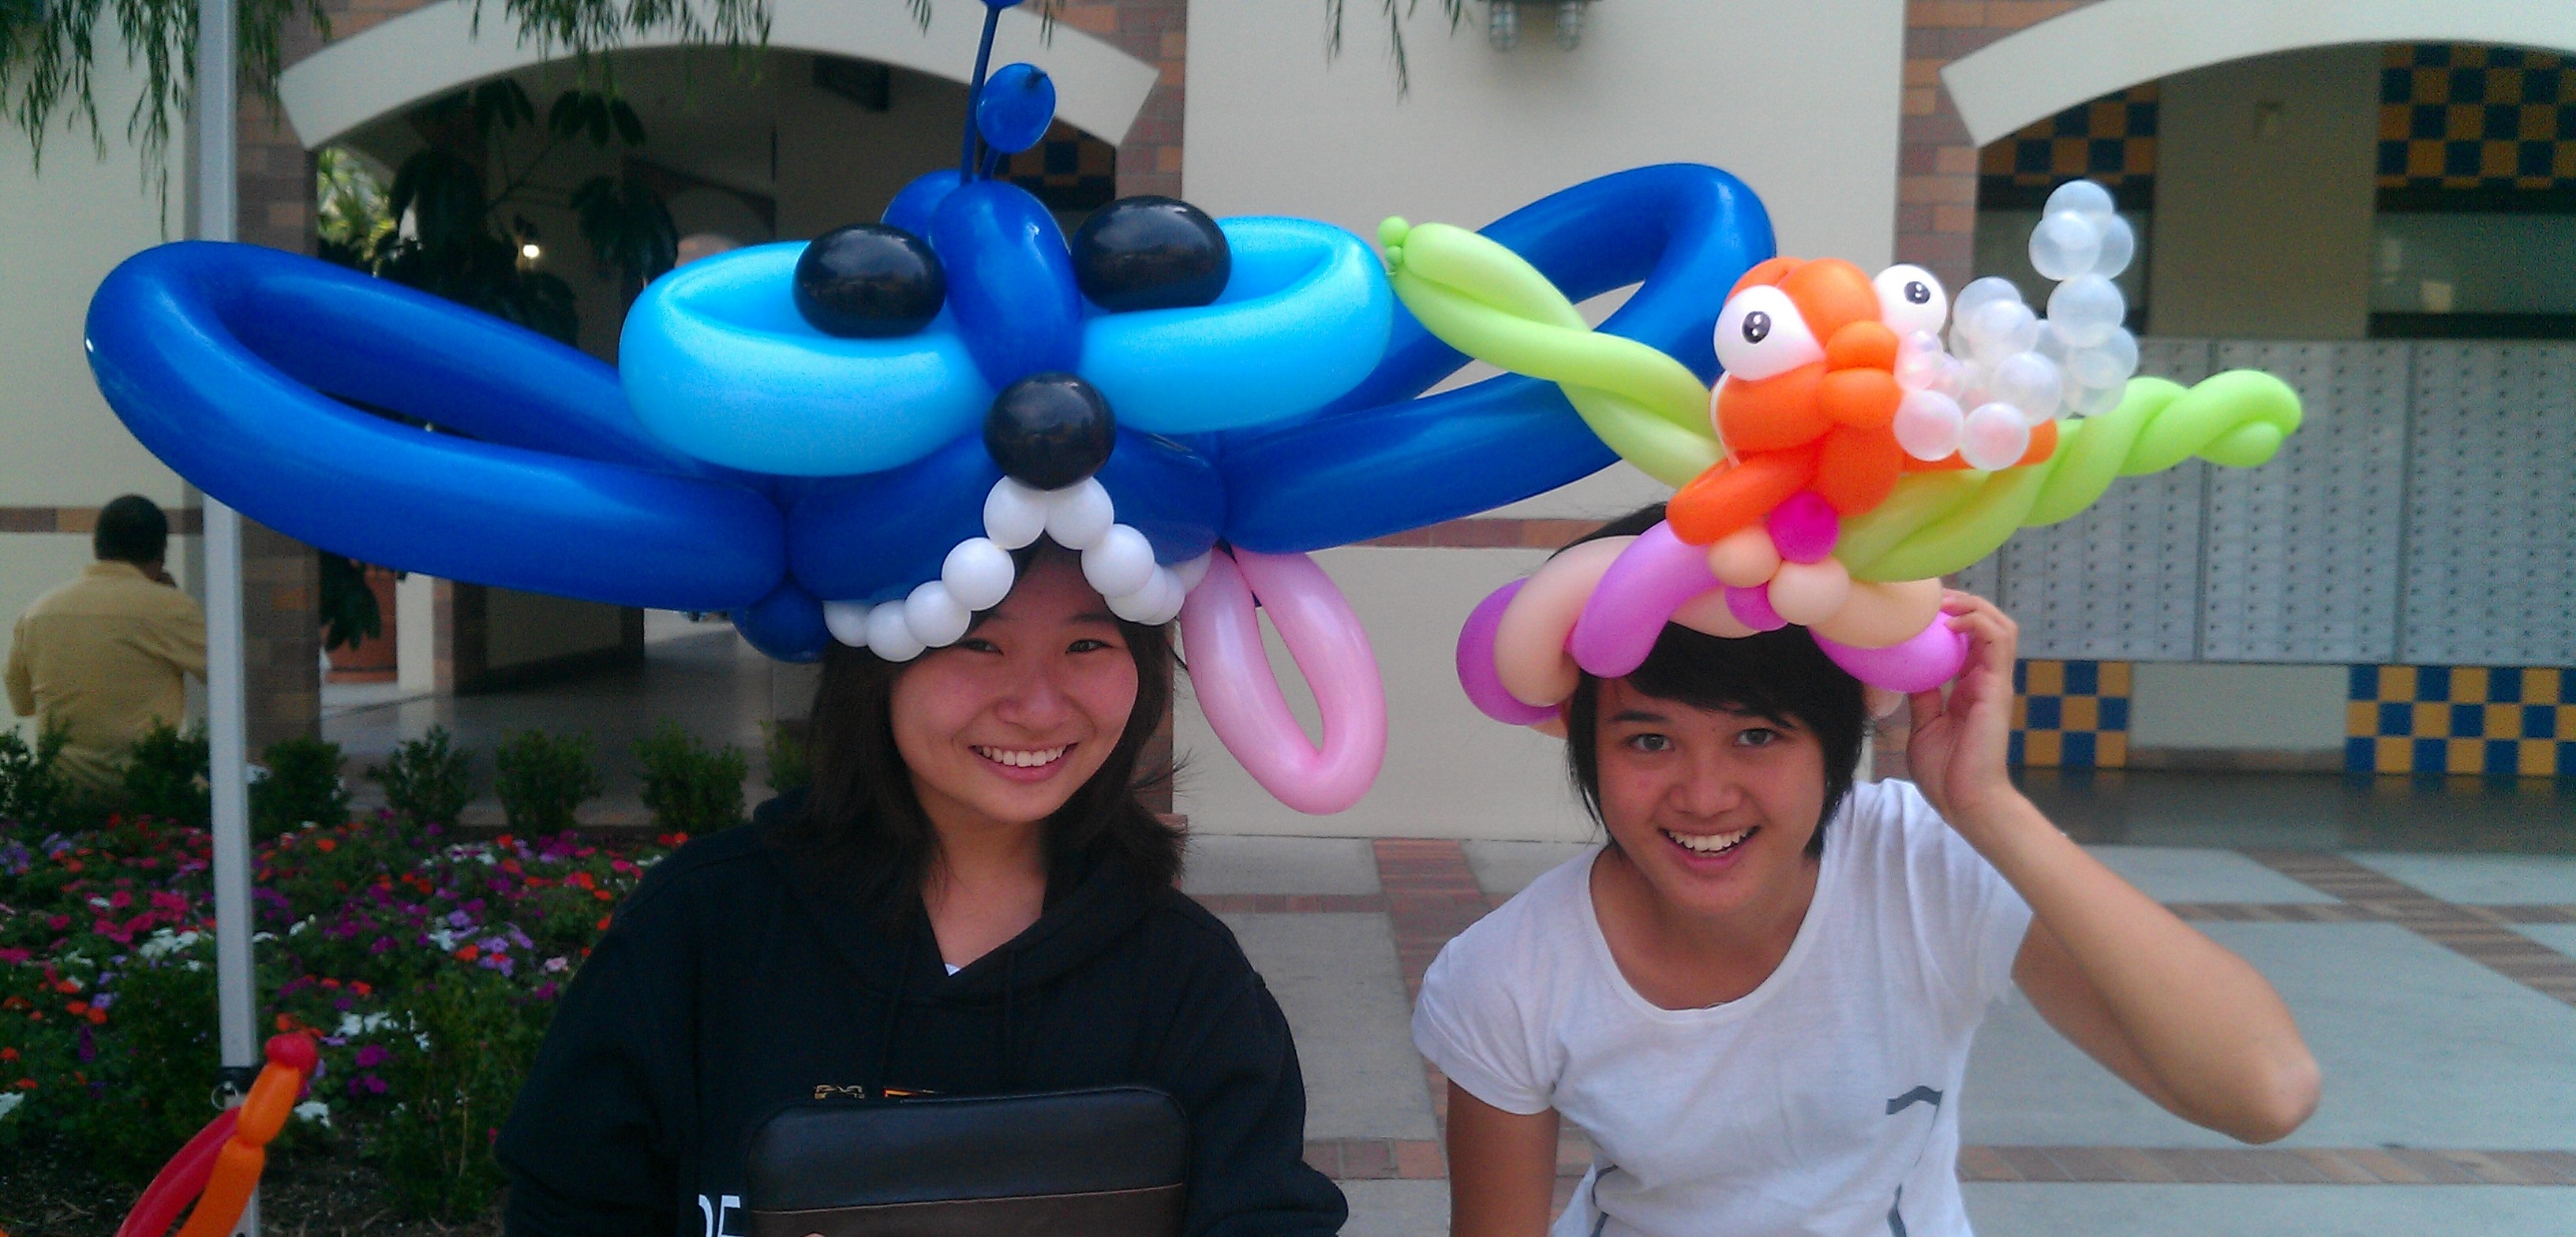 Upland balloon animals for parties